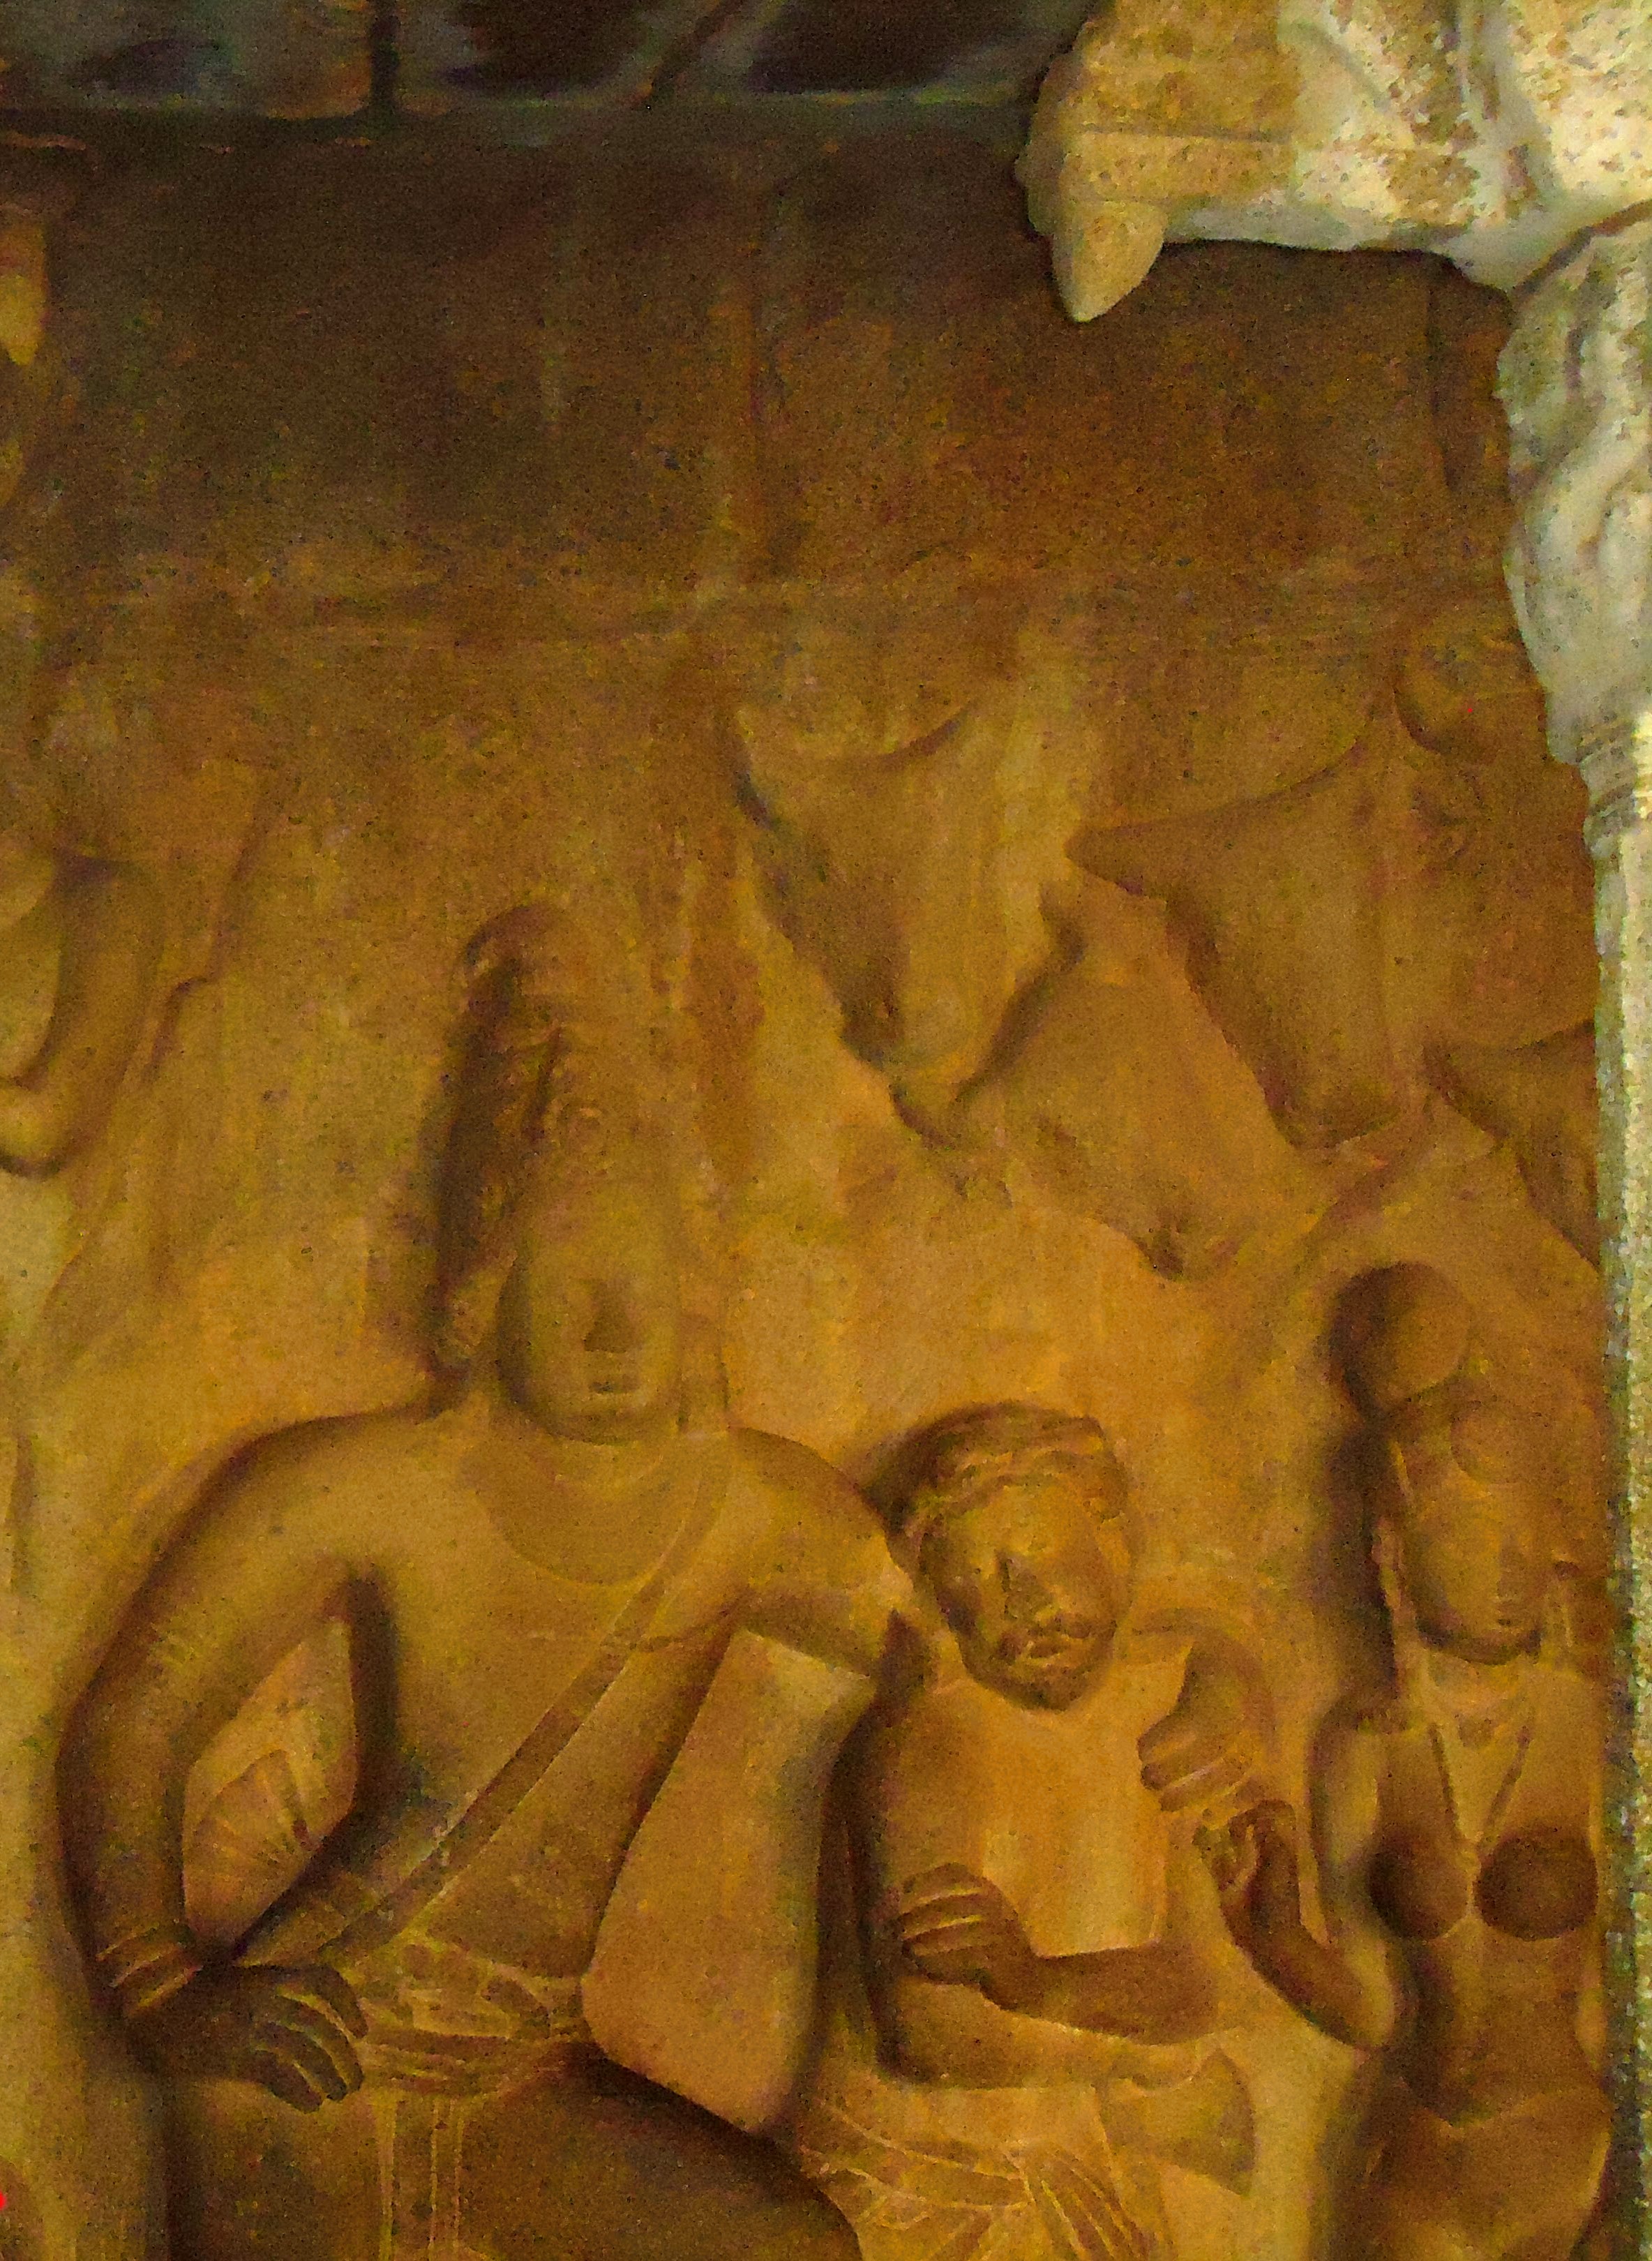 A Rich Cultural Heritage - A picture of Cave Sculptures of Lord Krishna and his friend Kuchela